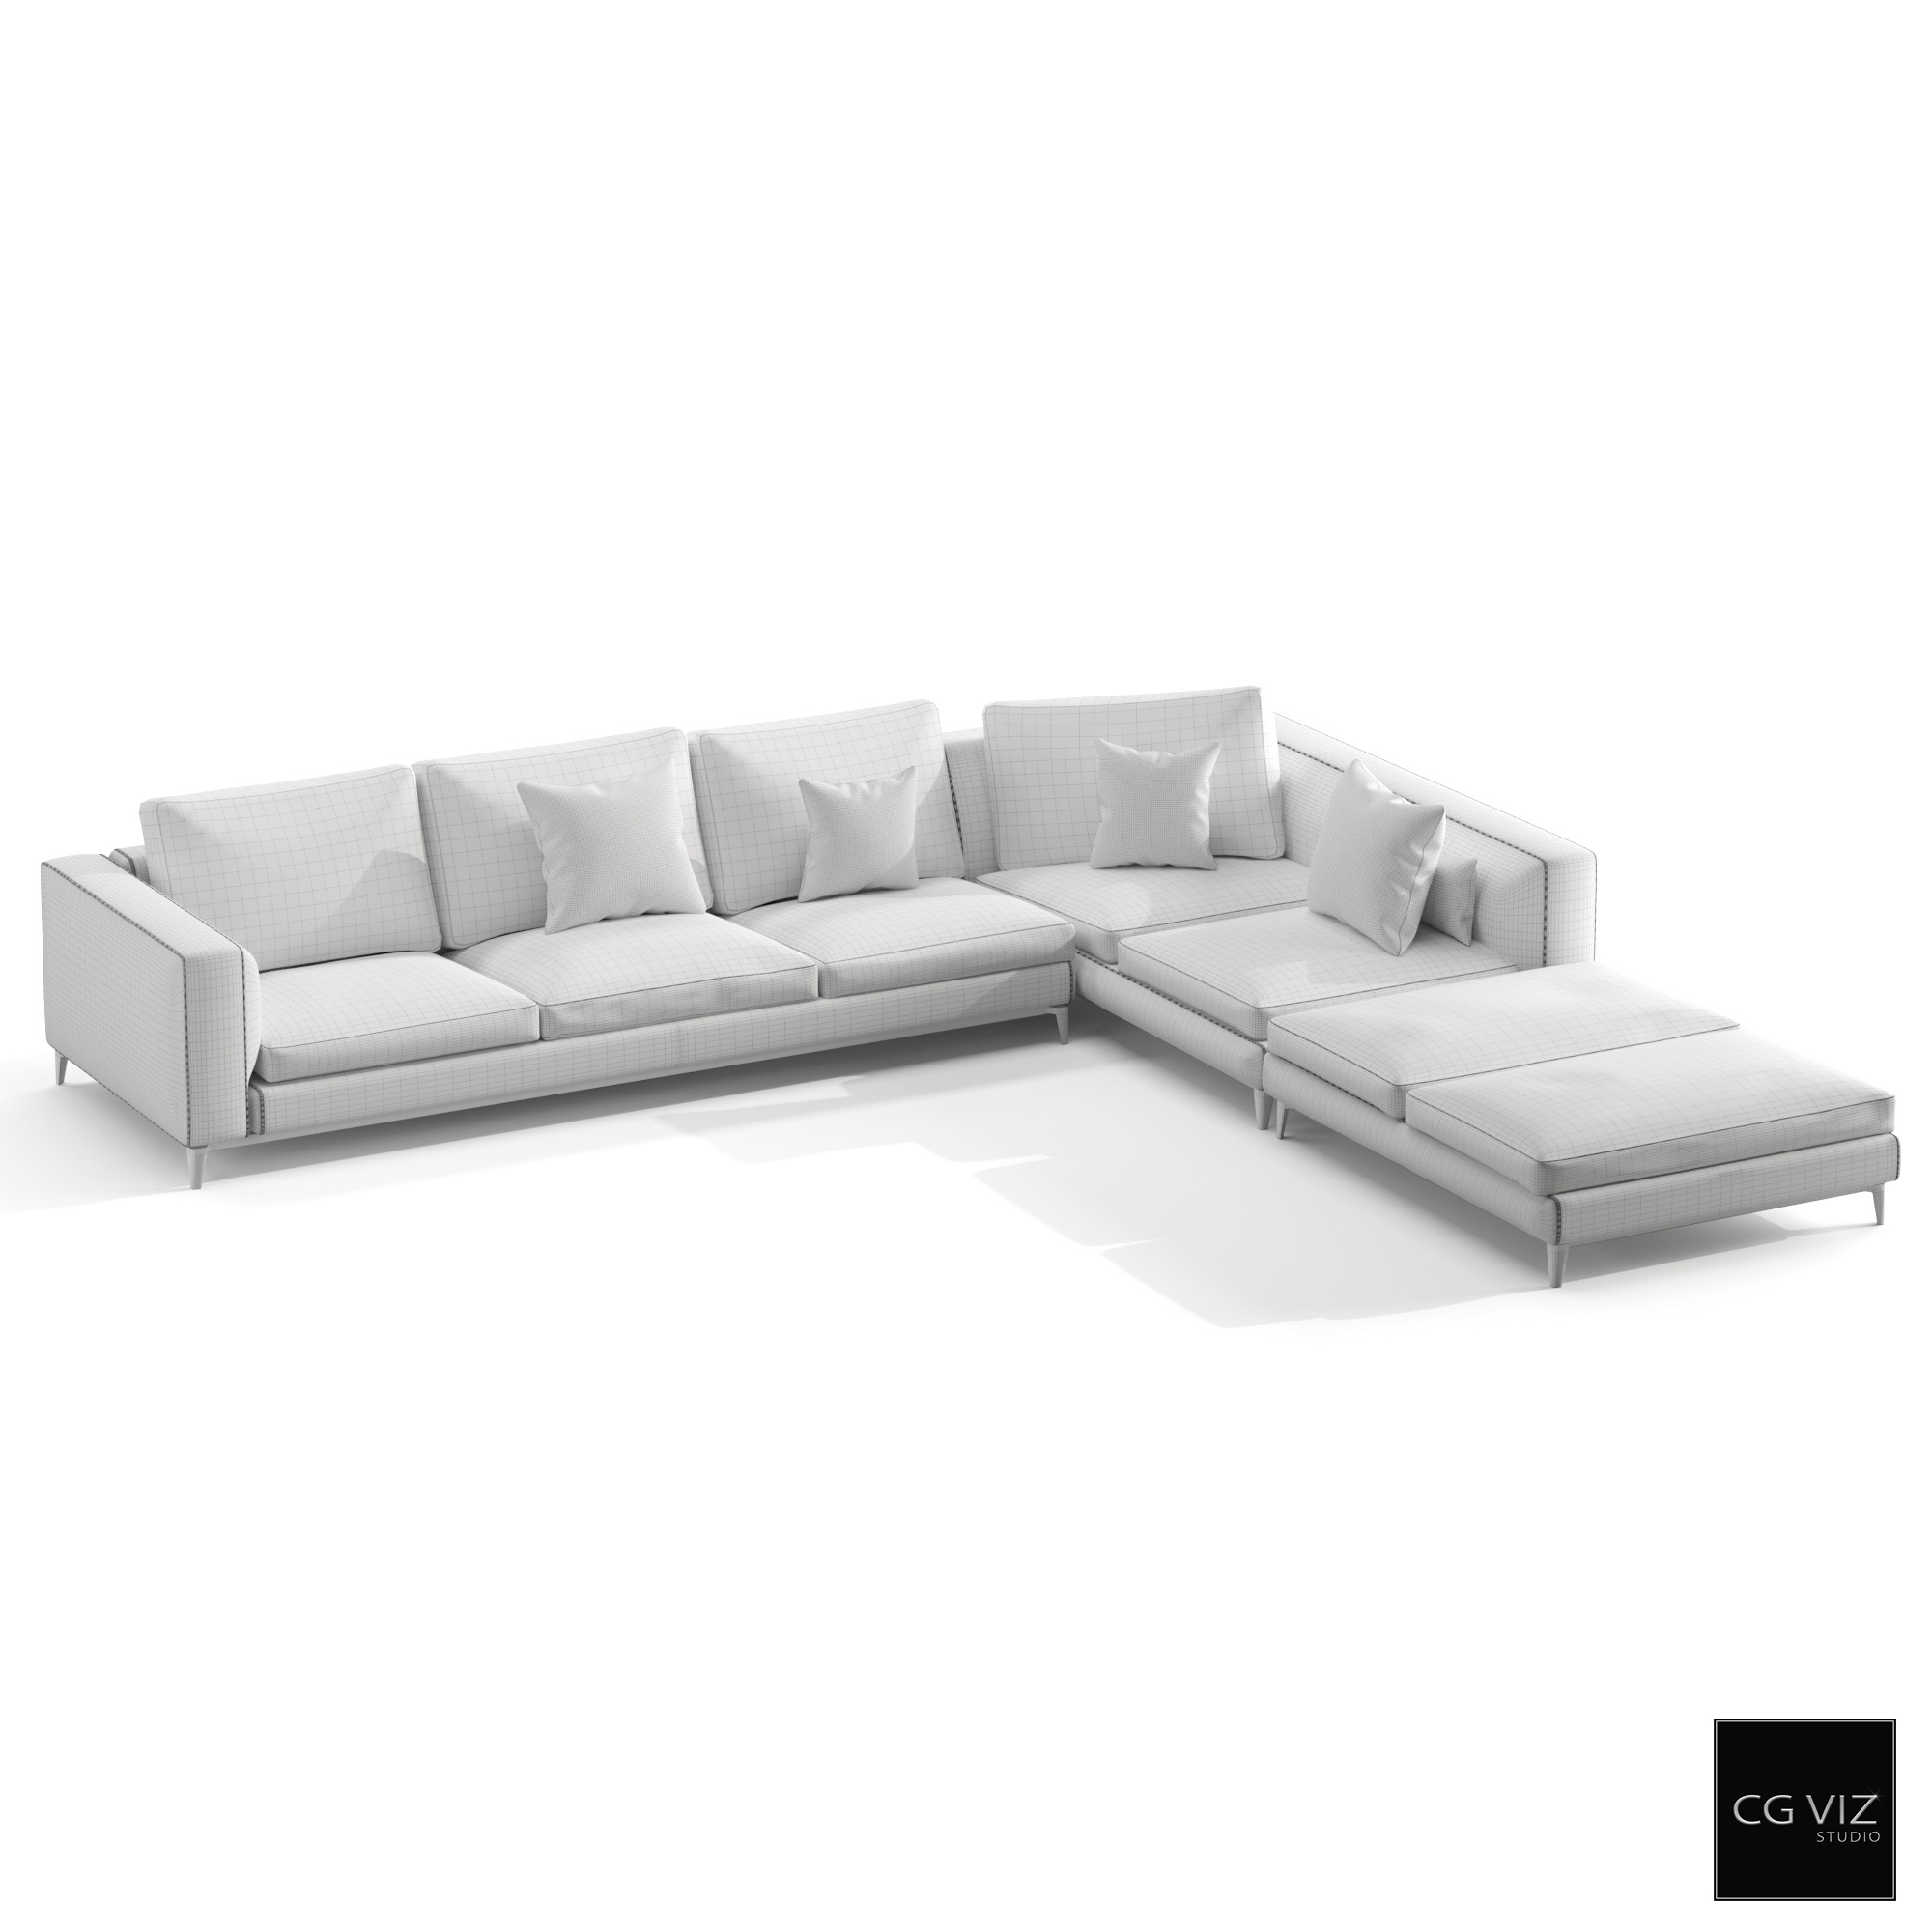 Wireframe View of Minotti Andersen Sofa 3D Model